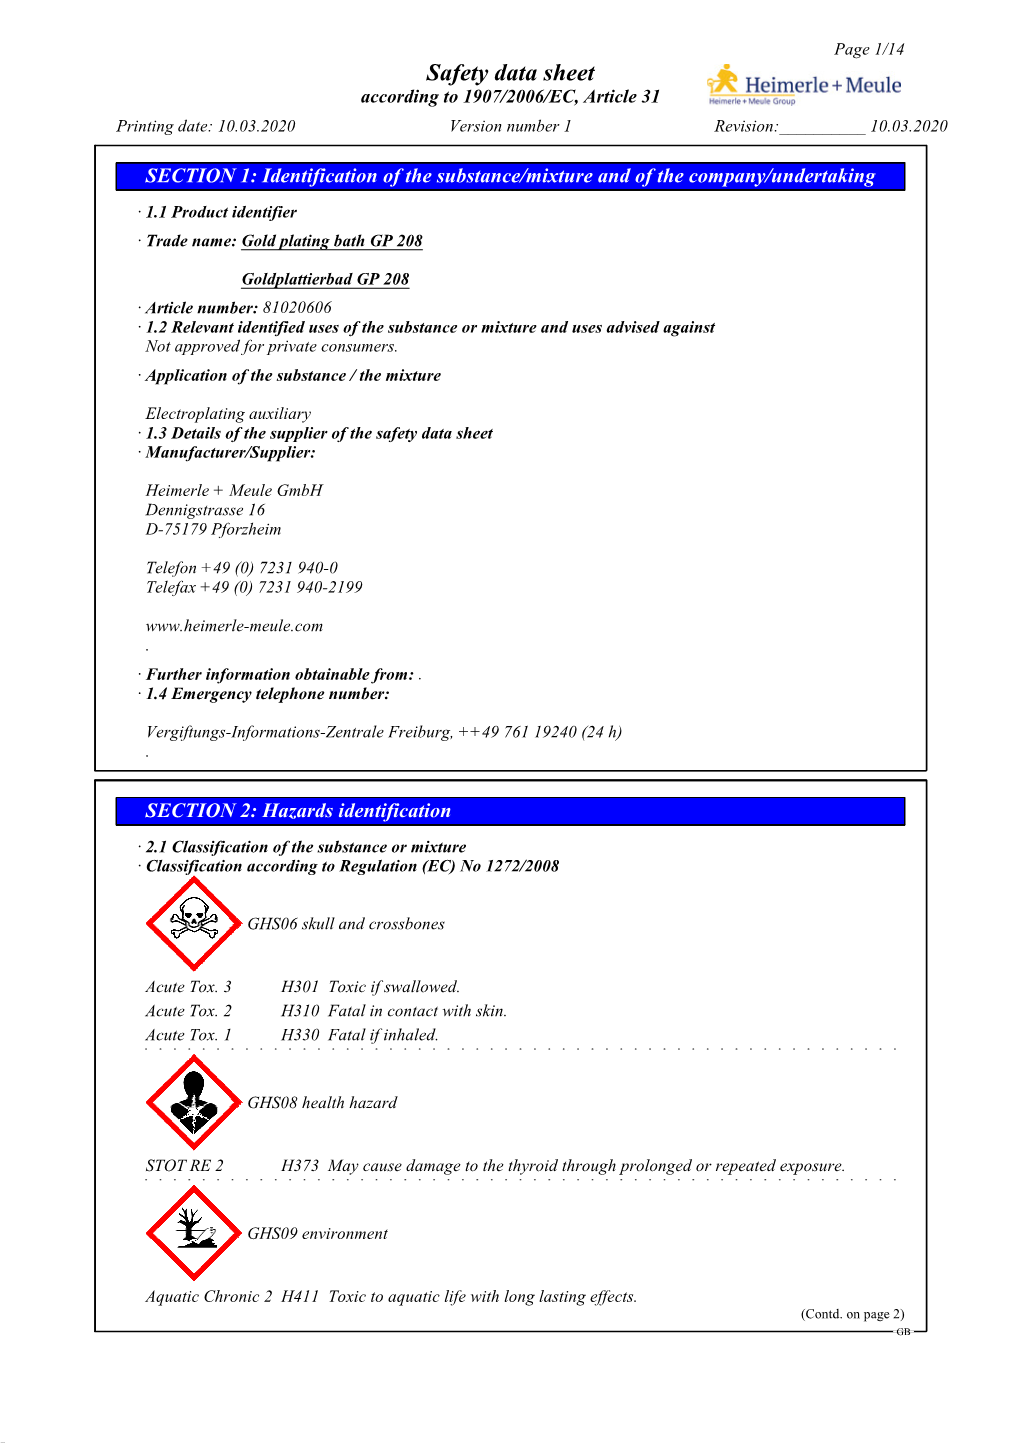 Safety Data Sheet According to 1907/2006/EC, Article 31 Printing Date: 10.03.2020 Version Number 1 Revision:______10.03.2020